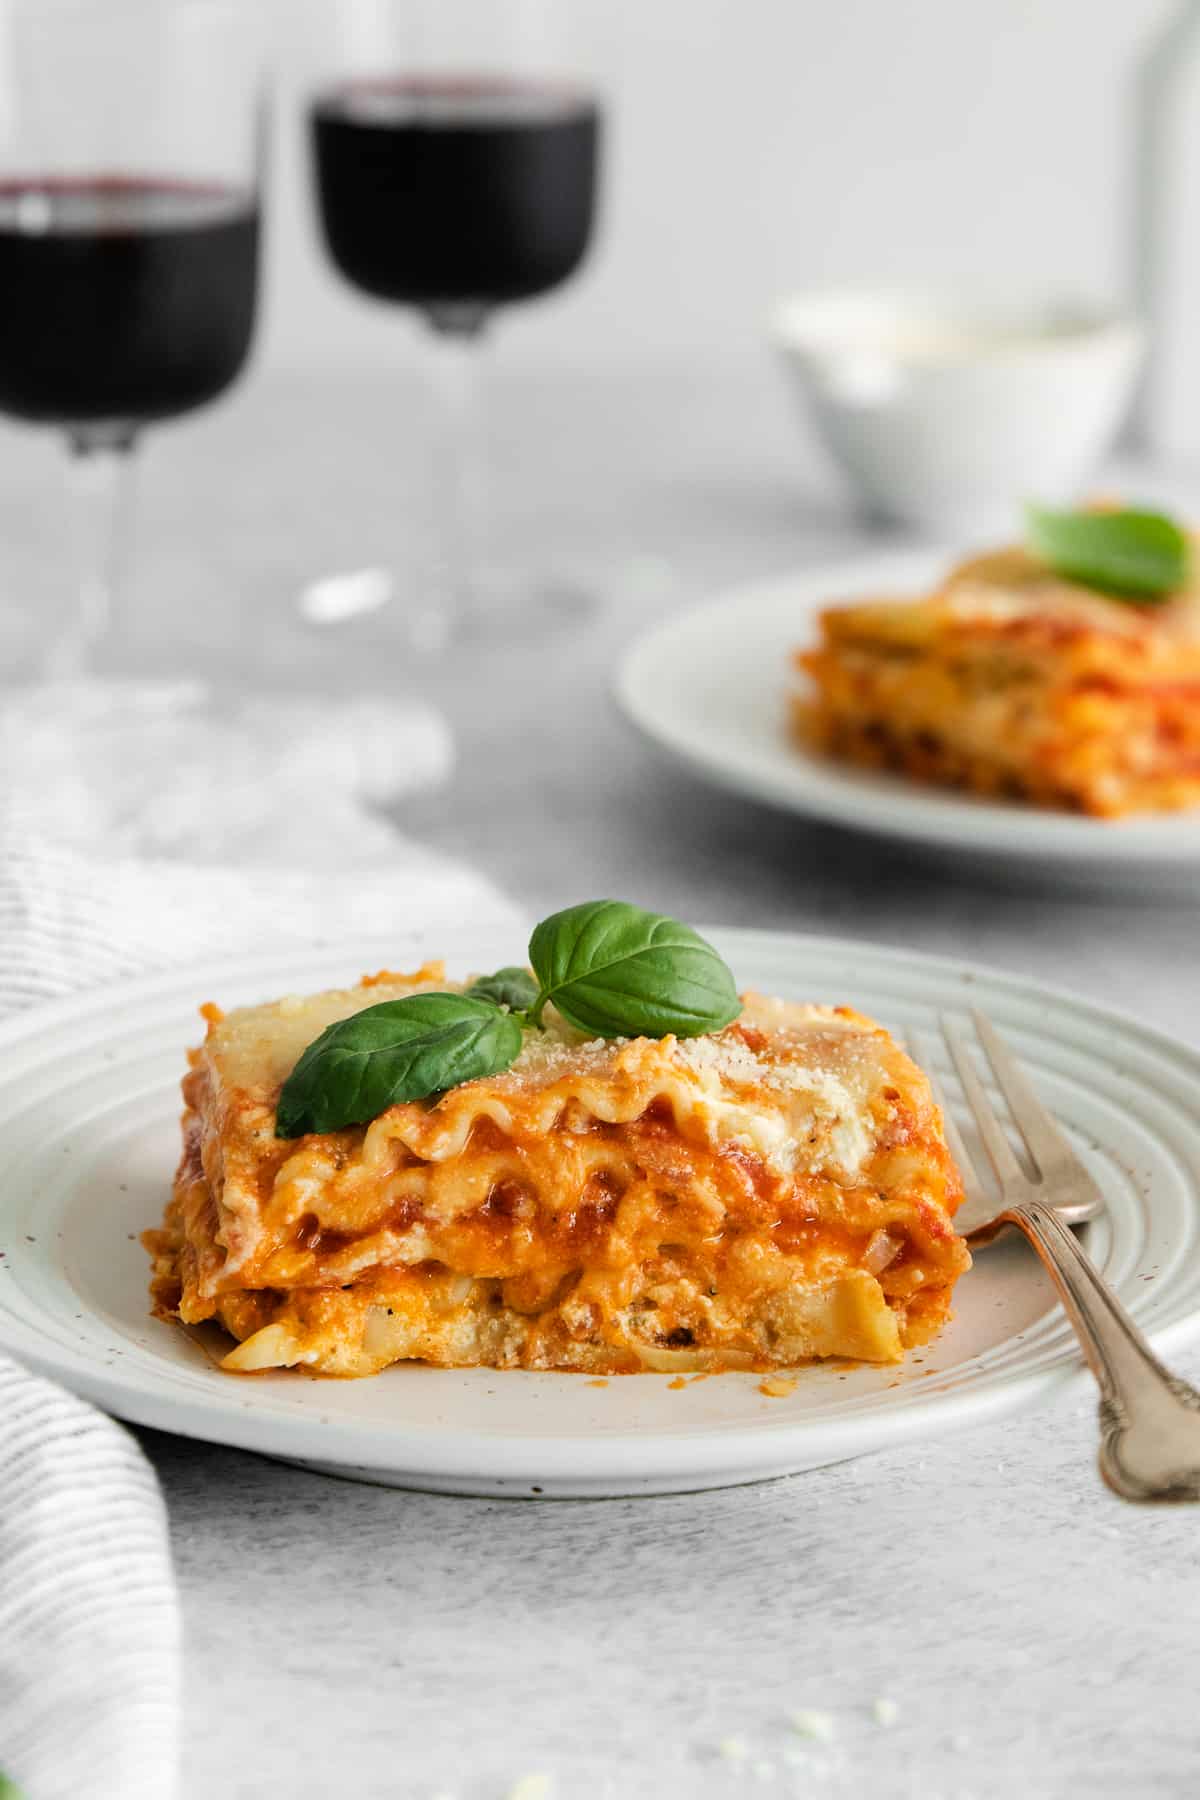 slice of cheese lasagna on plate.